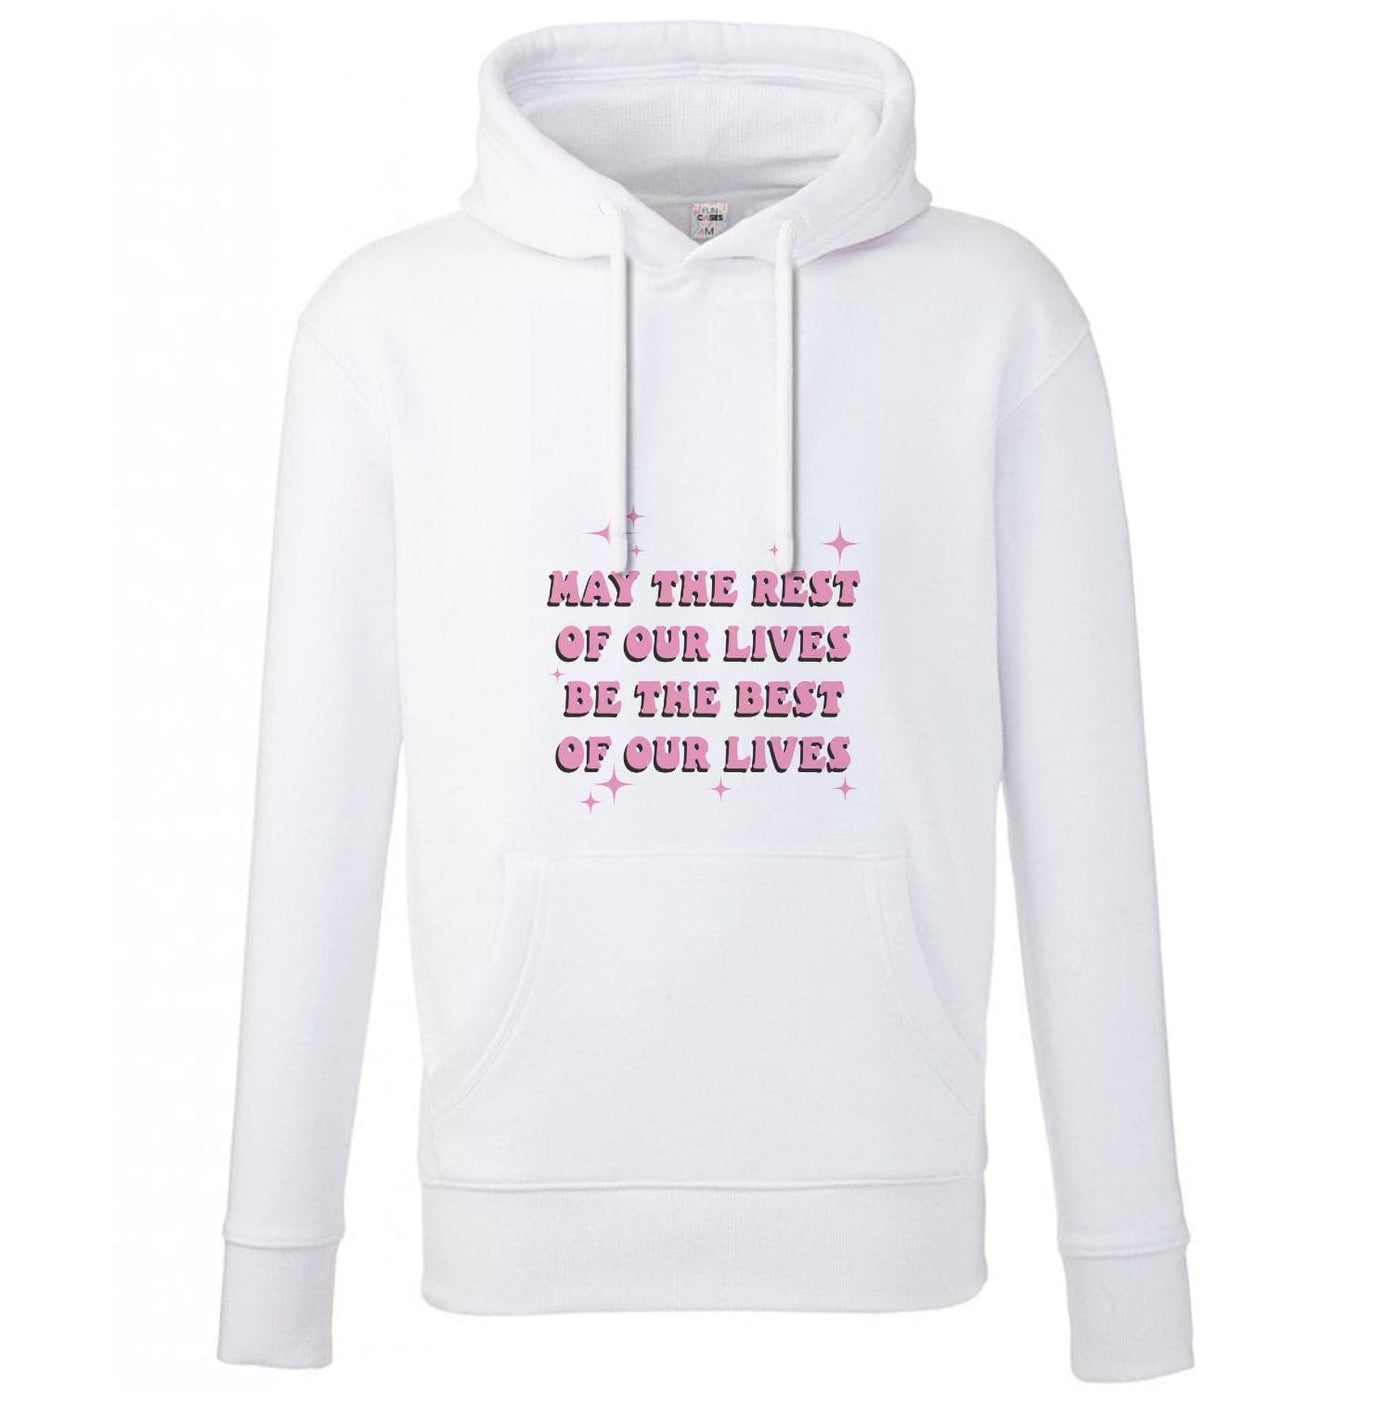 Best Of Our Lives - Mamma Mia Hoodie